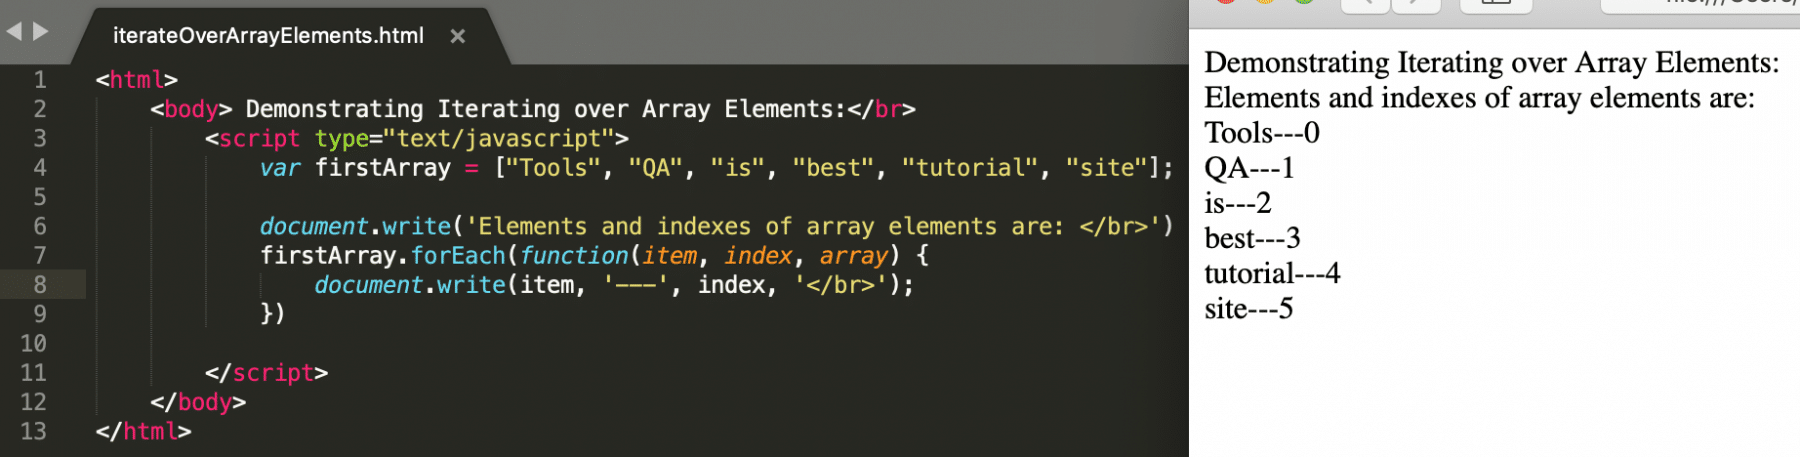 Iterating Over Array Elements